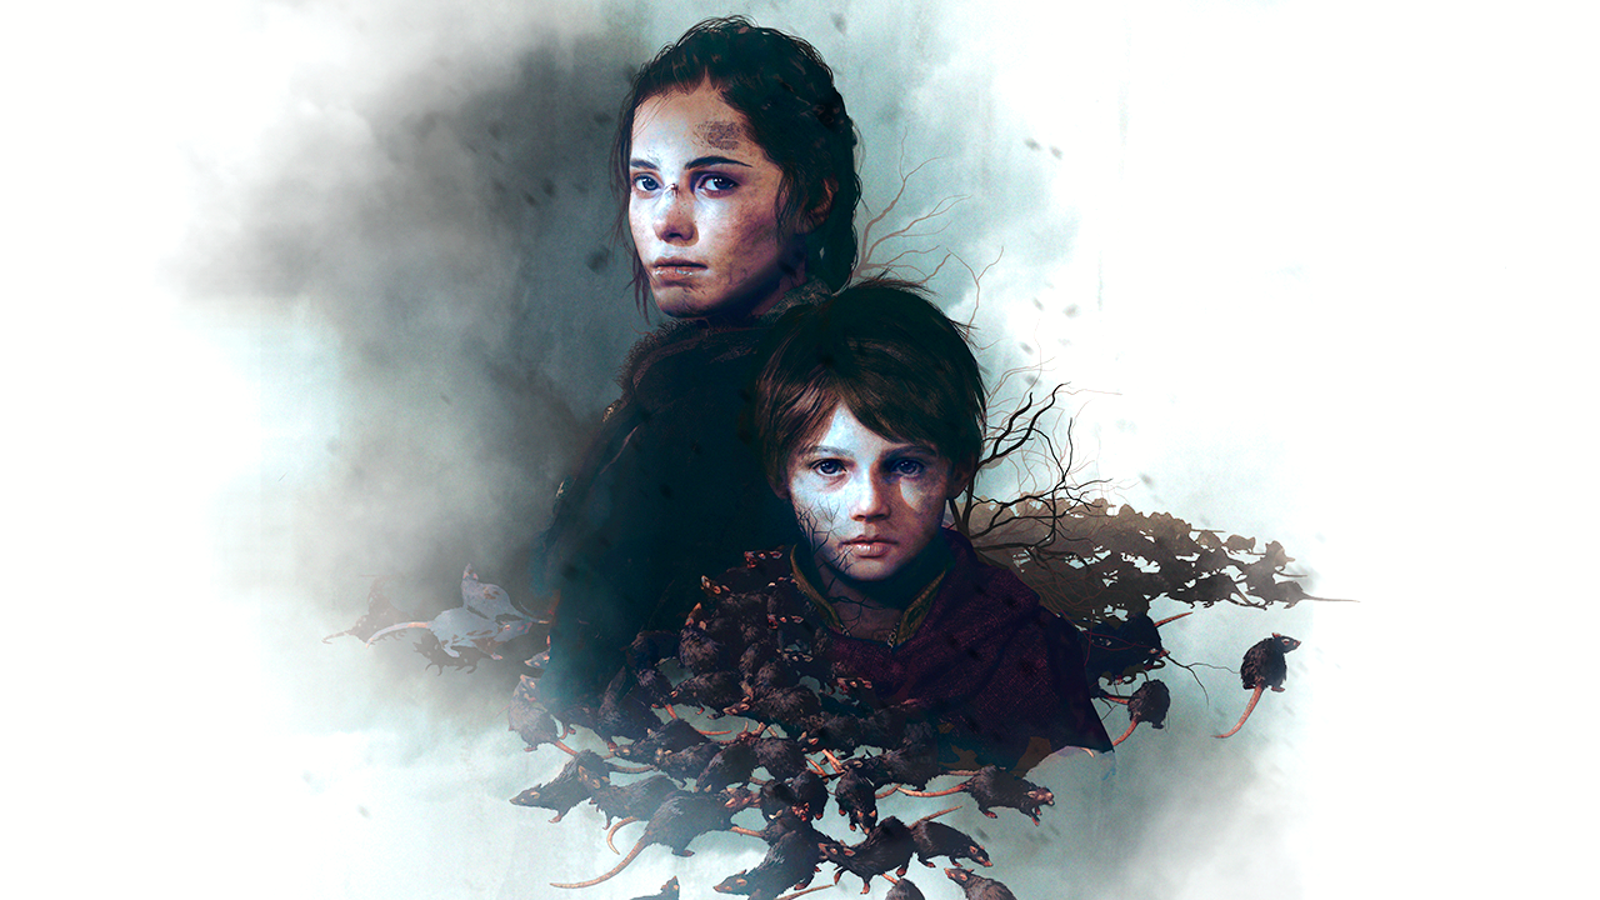 A Plague Tale 2 reportedly in development